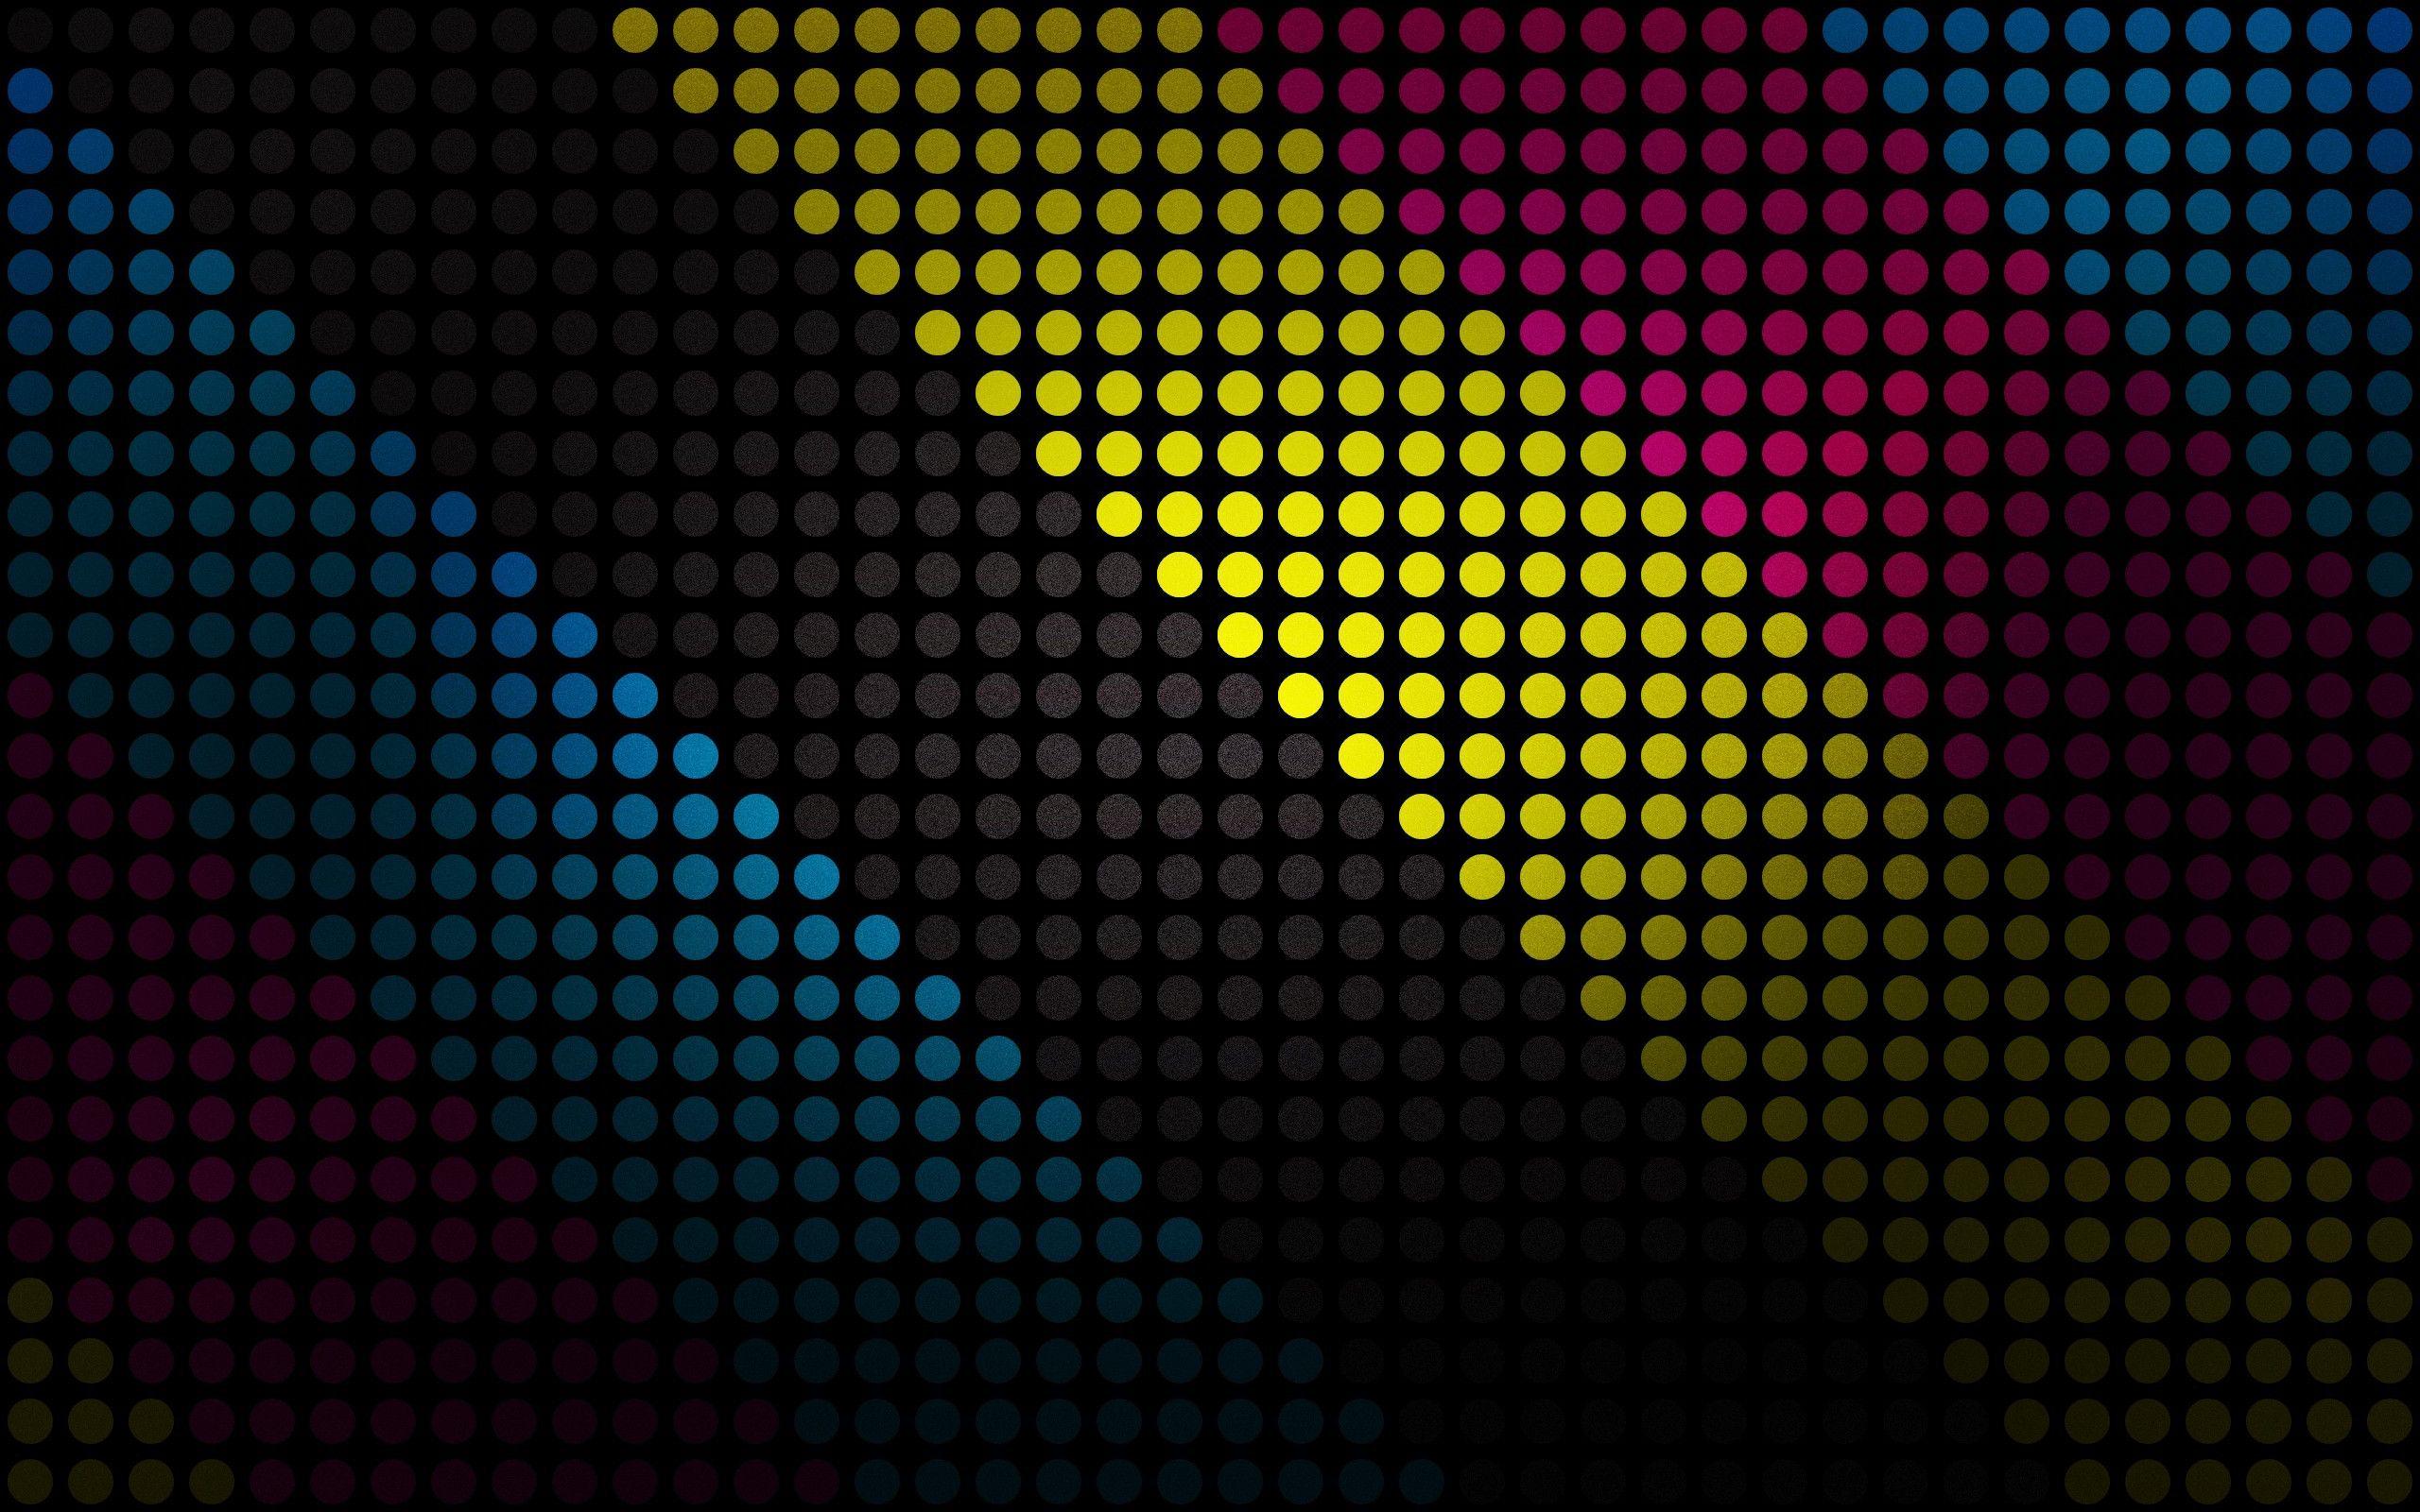 30 wallpapers perfect for AMOLED screens